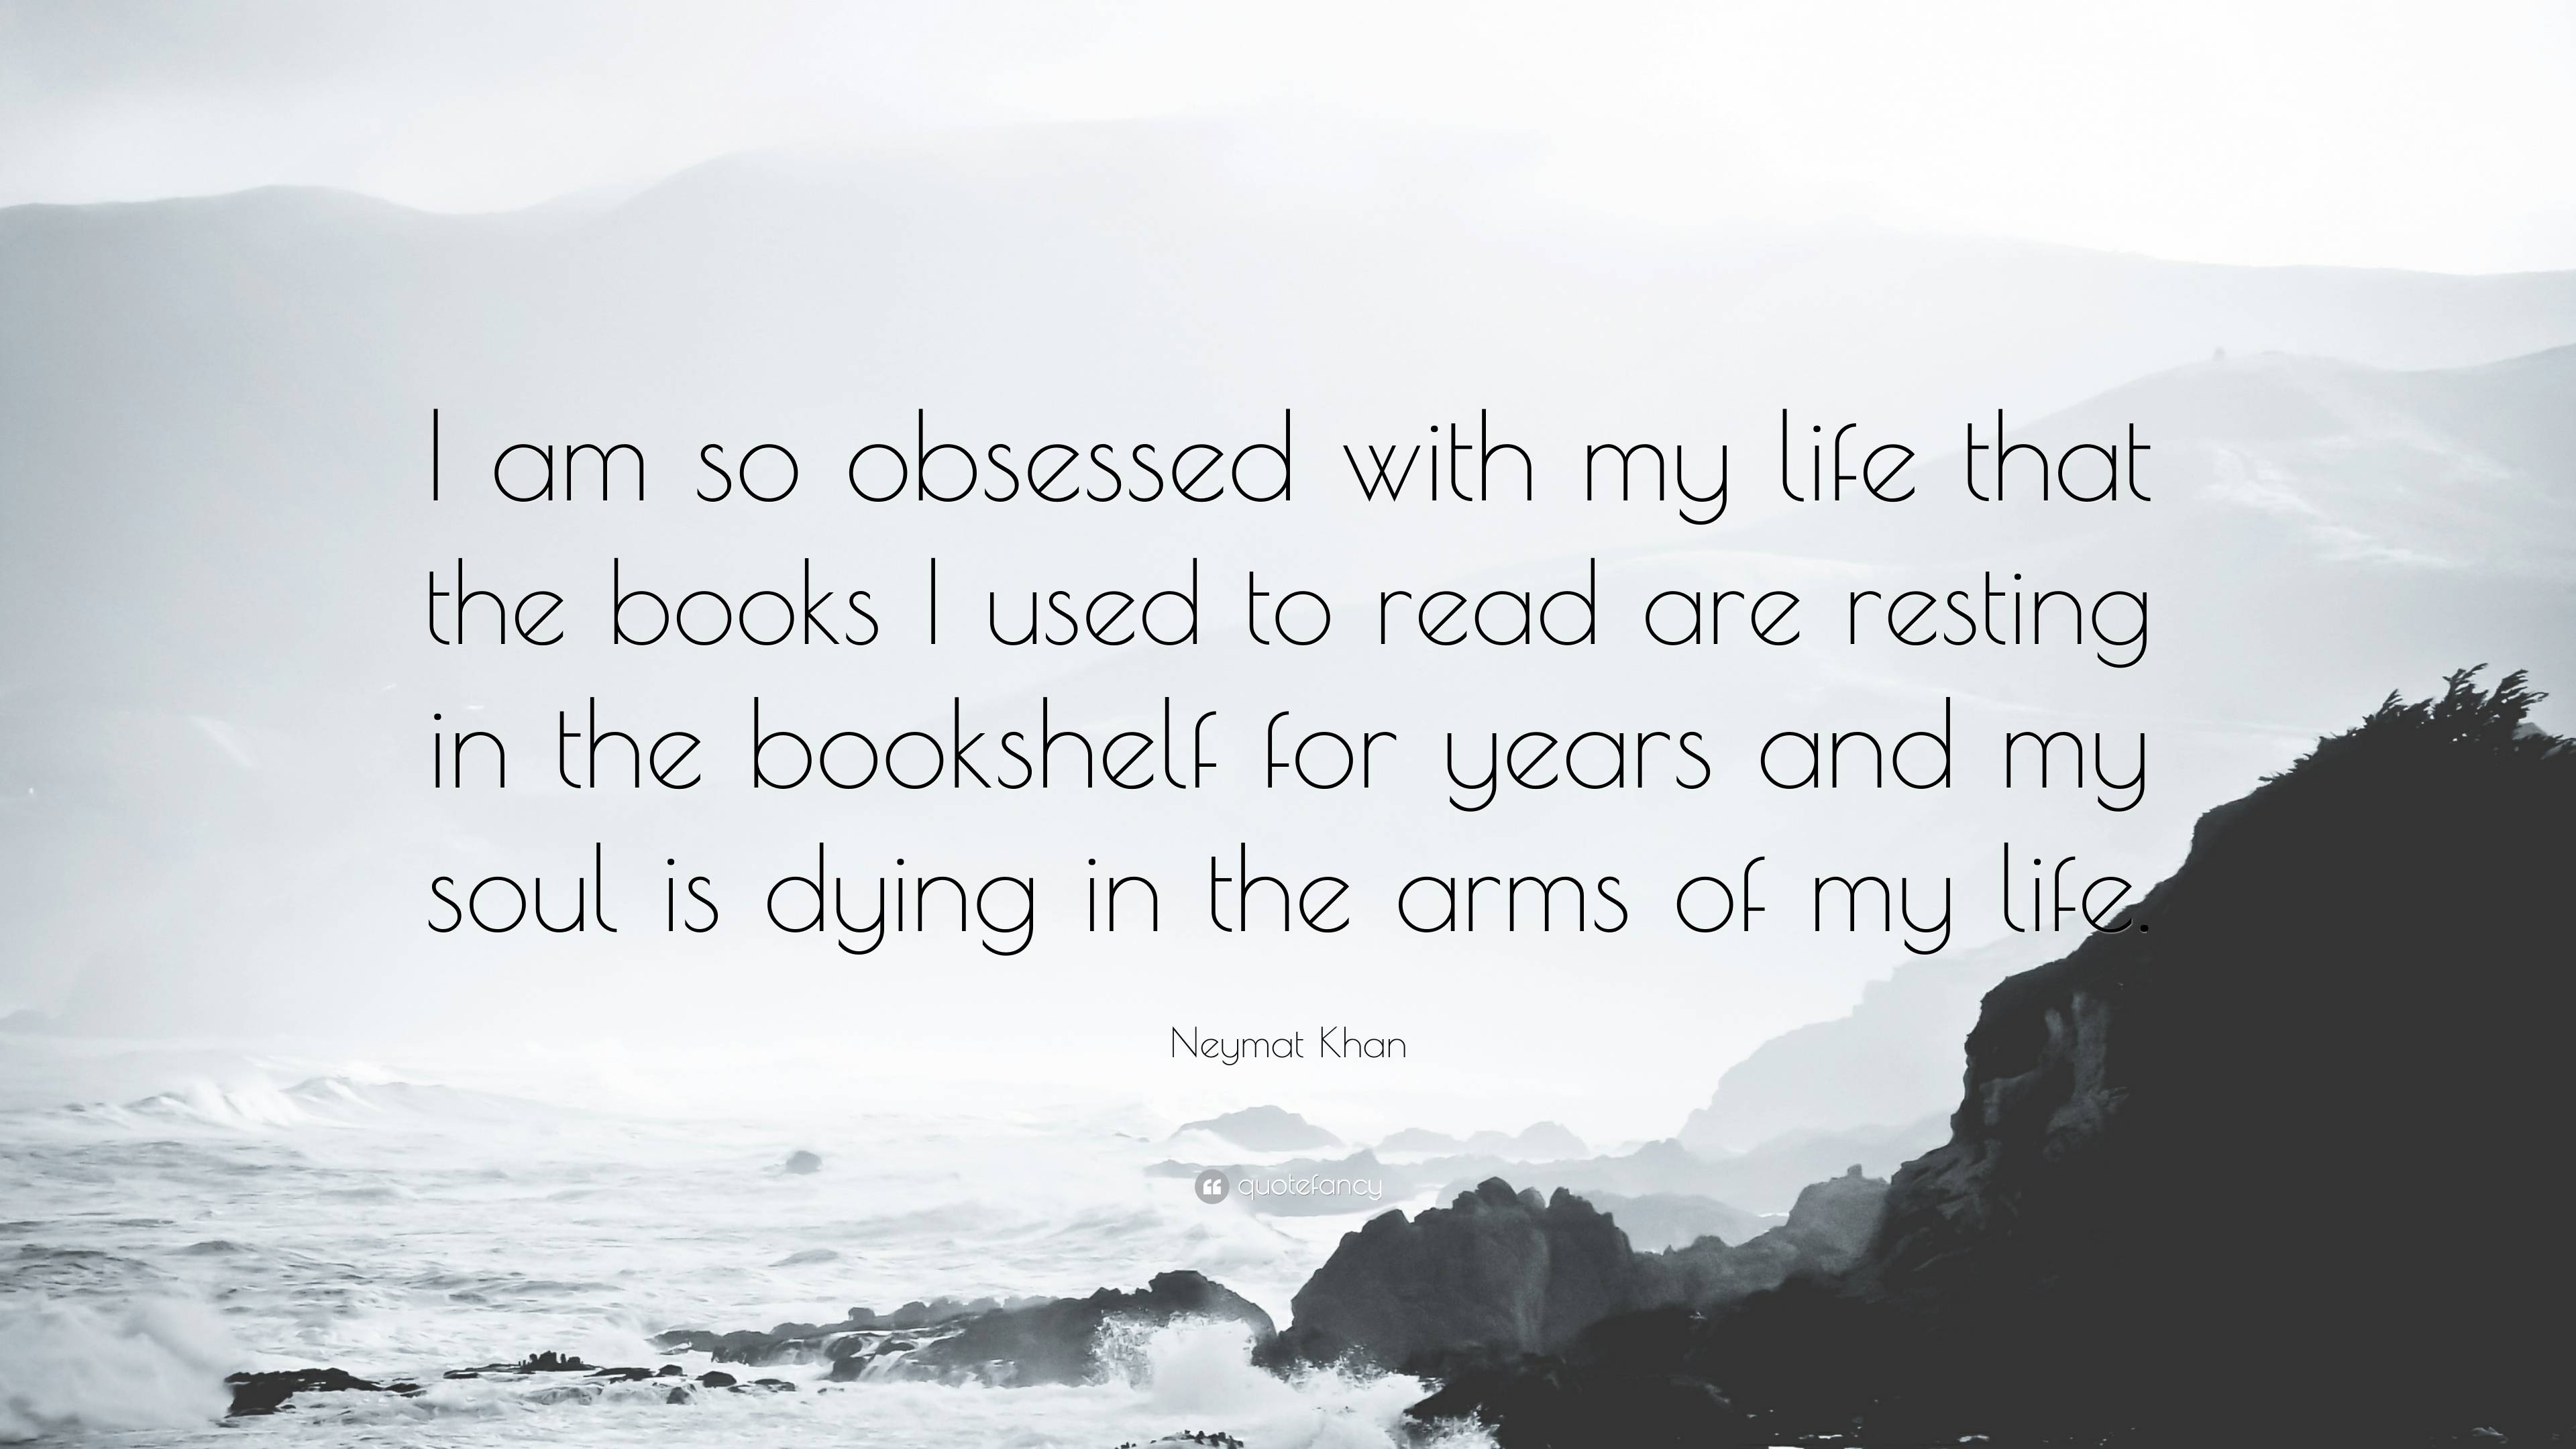 Neymat Khan Quote: “I am so obsessed with my life that the books I used to  read are resting in the bookshelf for years and my soul is dying ”